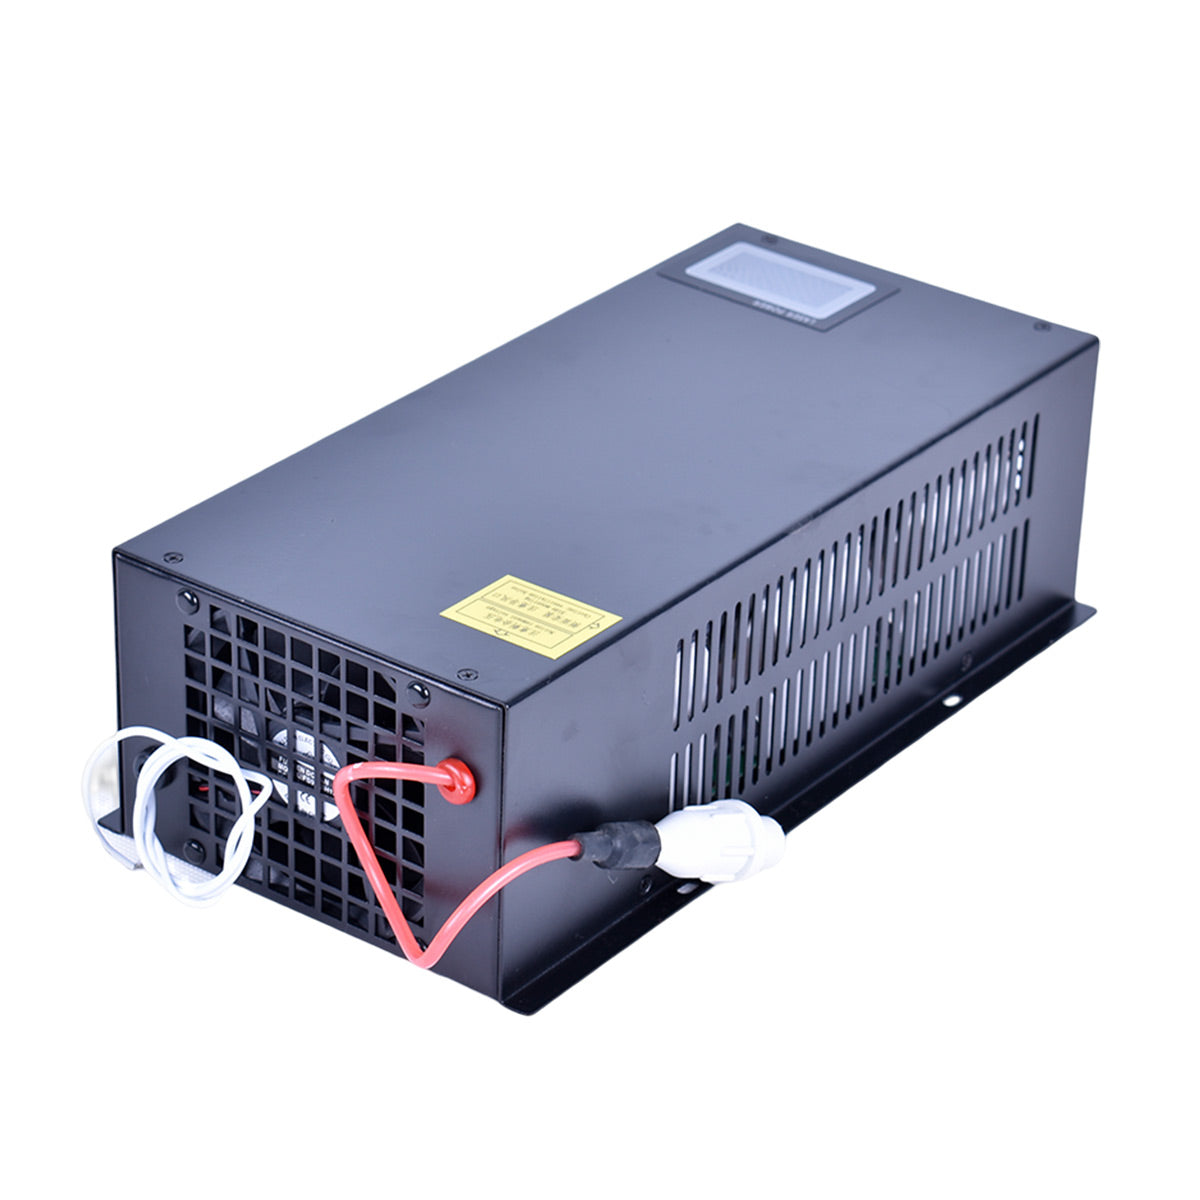 Startnow 150W-BD Laser Power Supply For 130W CO2 Laser Tube High Voltage Cut Machine Laser Accessories 150W With Display Screen